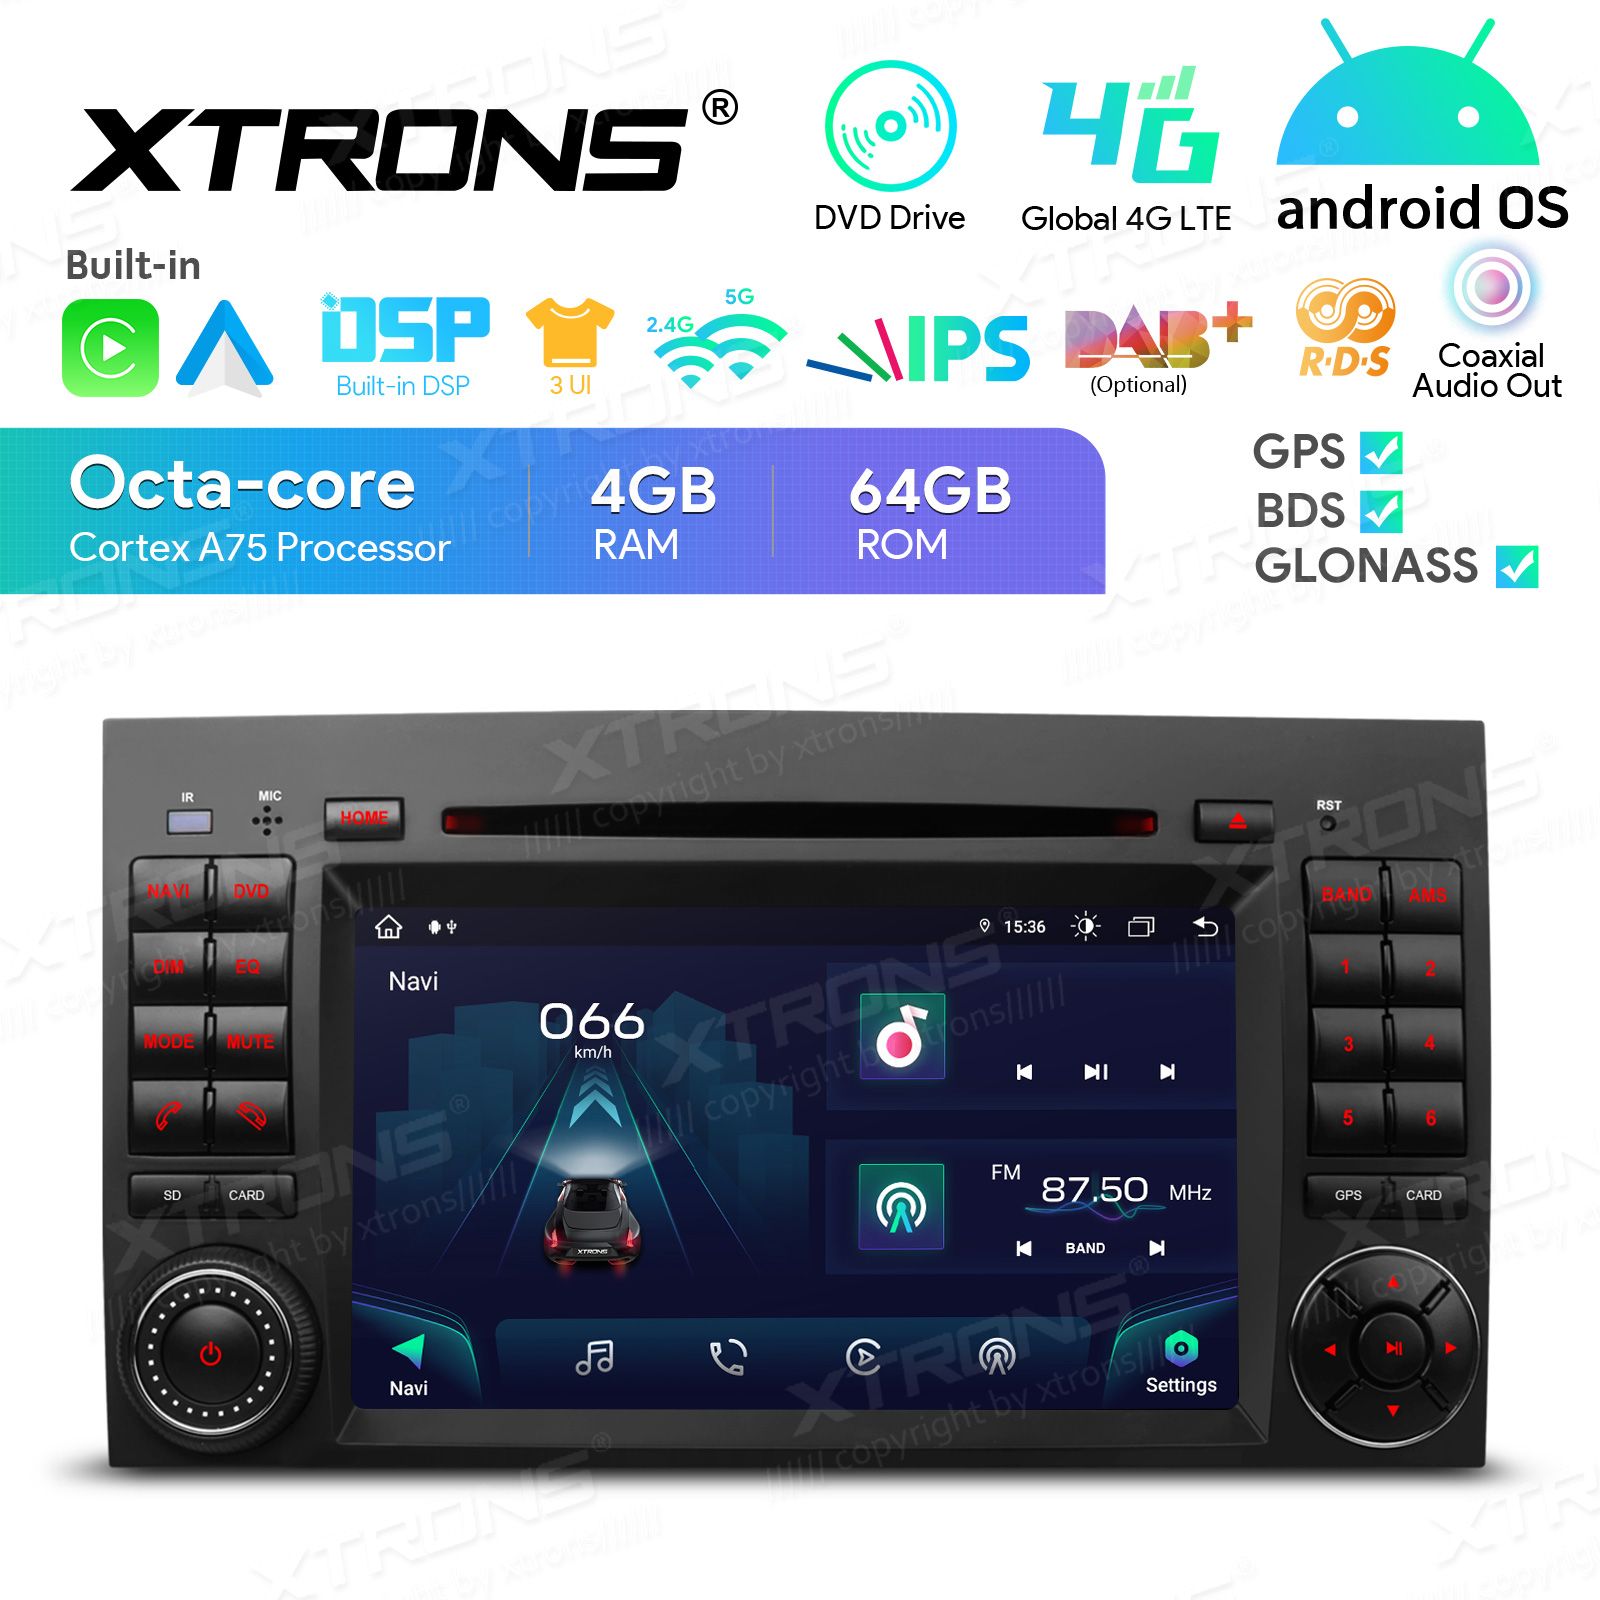 Mercedes-Benz Sprinter | Vito & Viano (2006-2020) | A-Class | B-Class (2004-2012) Android 13  | GPS car radio and multimedia system